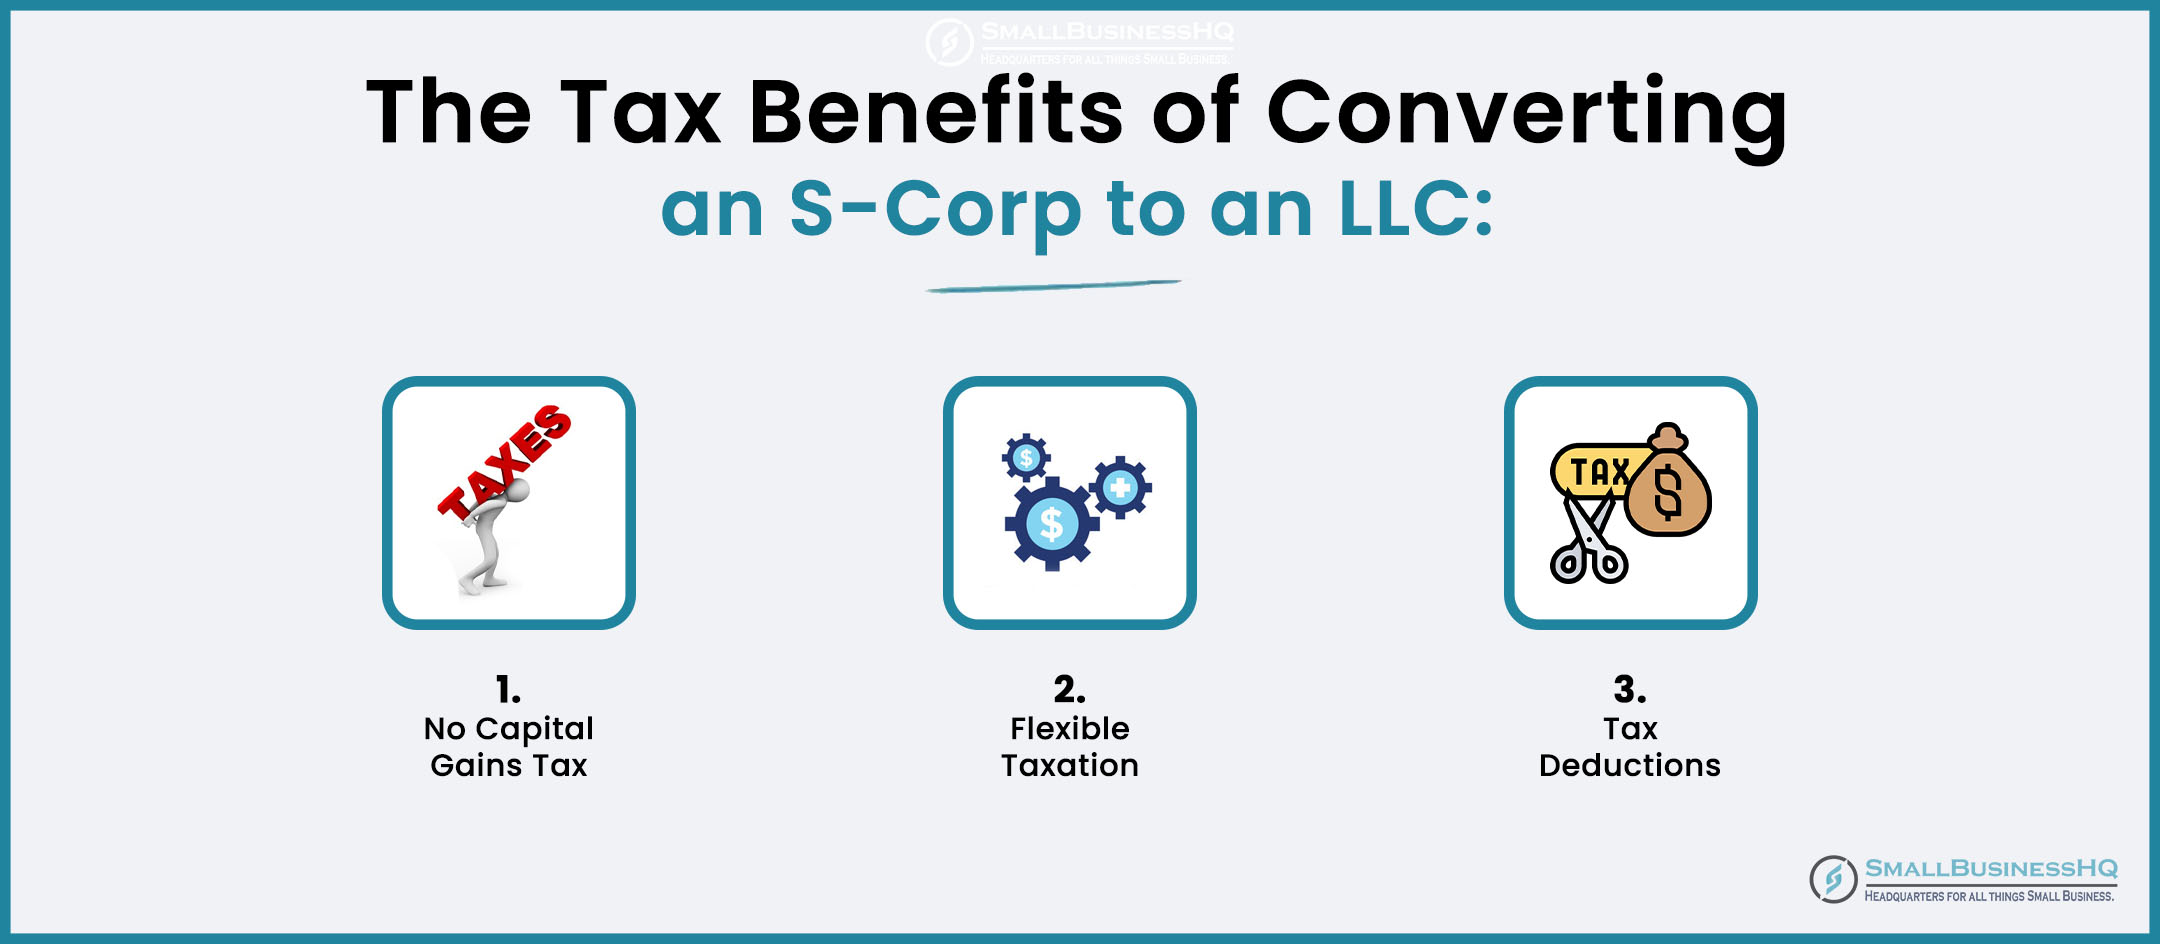 The Tax Benefits of Converting an S-Corp to an LLC